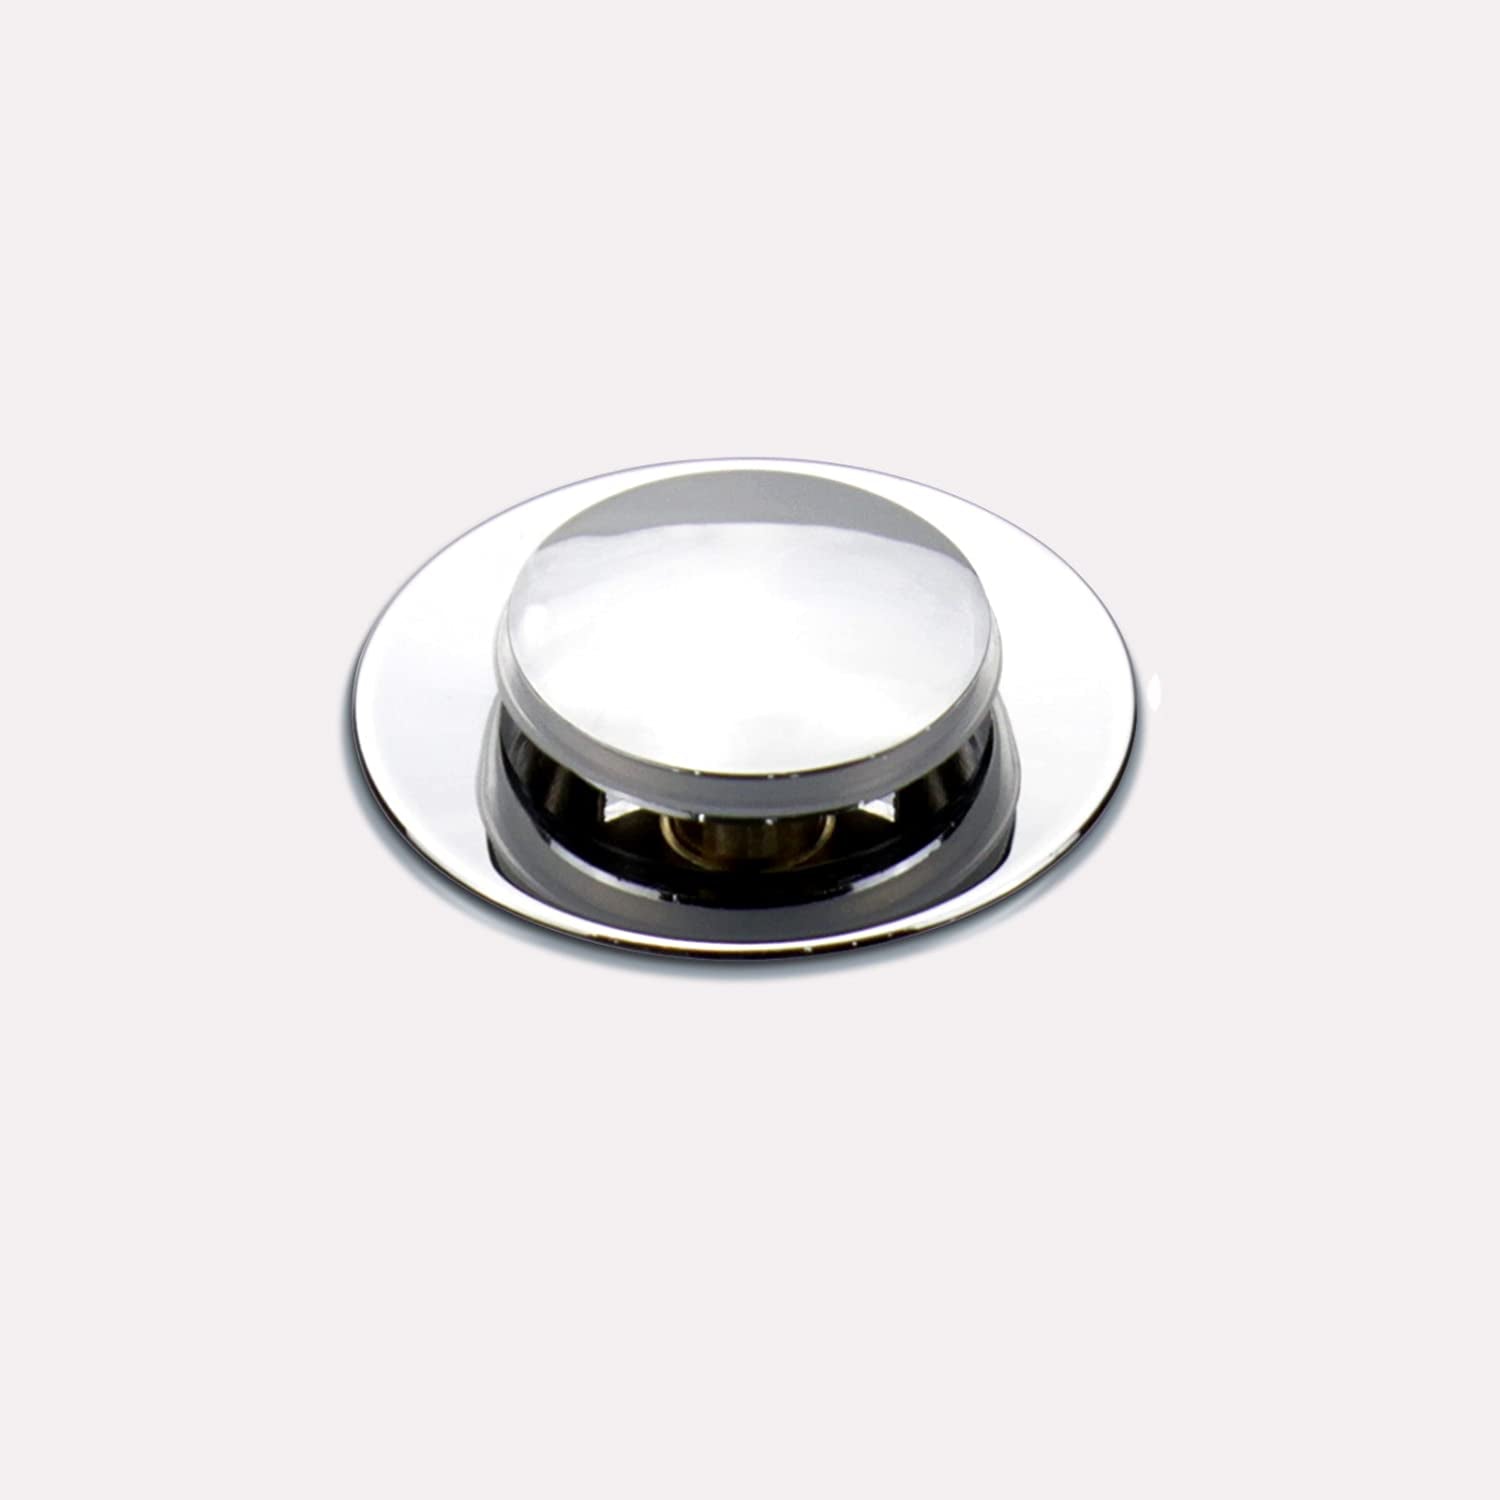 Premium Polished Chrome Sink Drain without Overflow - Ideal for Bathroom Faucets, Vessel Vanity Sinks, and Stopper Functions